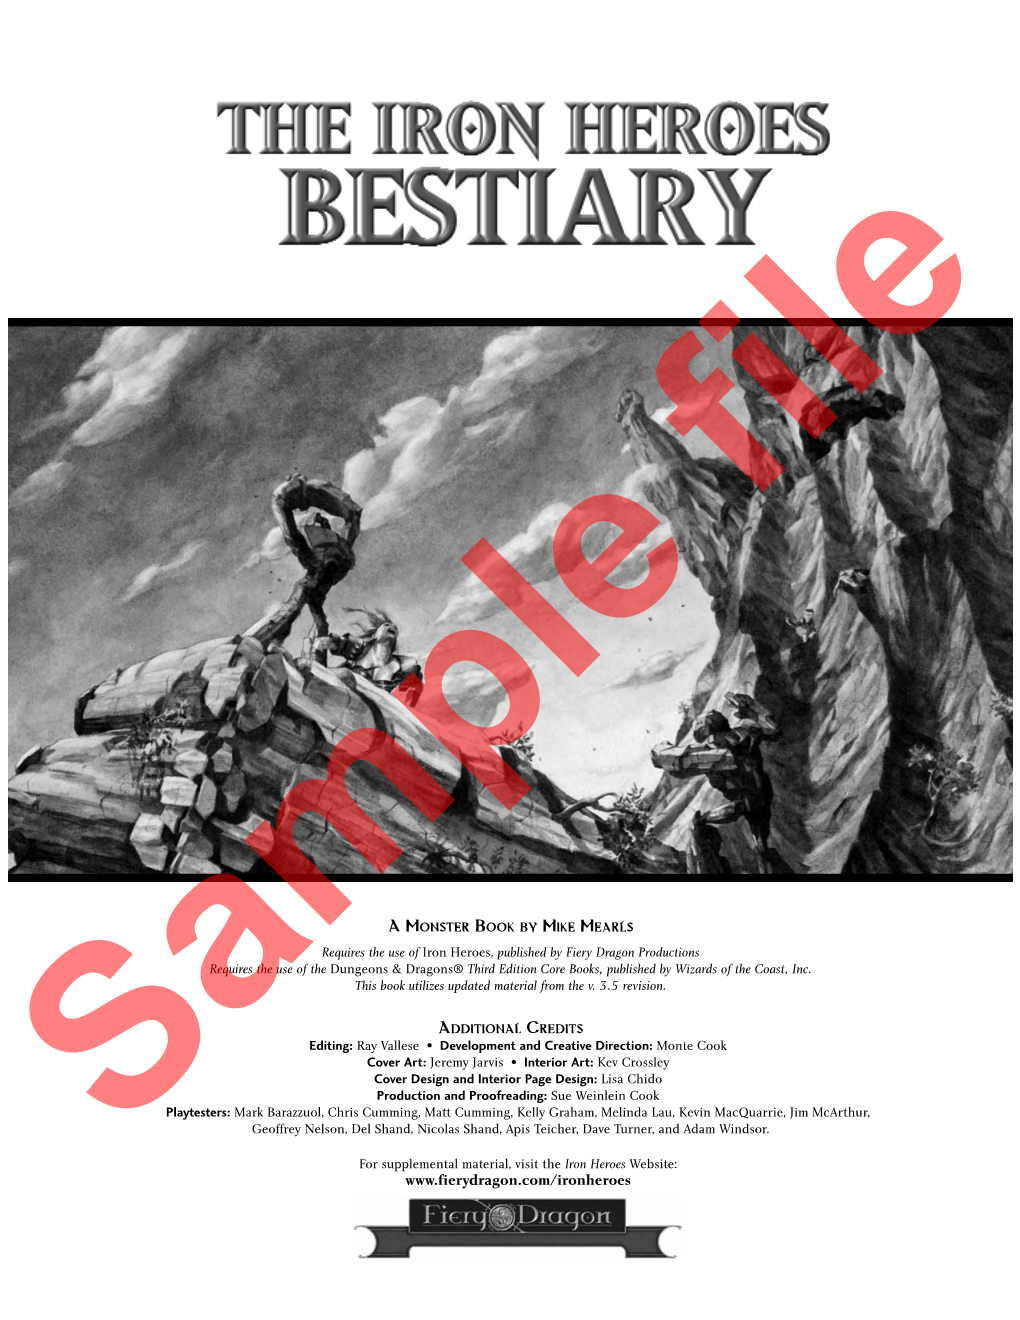 THE IRON HEROES BESTIARY Table of Contents